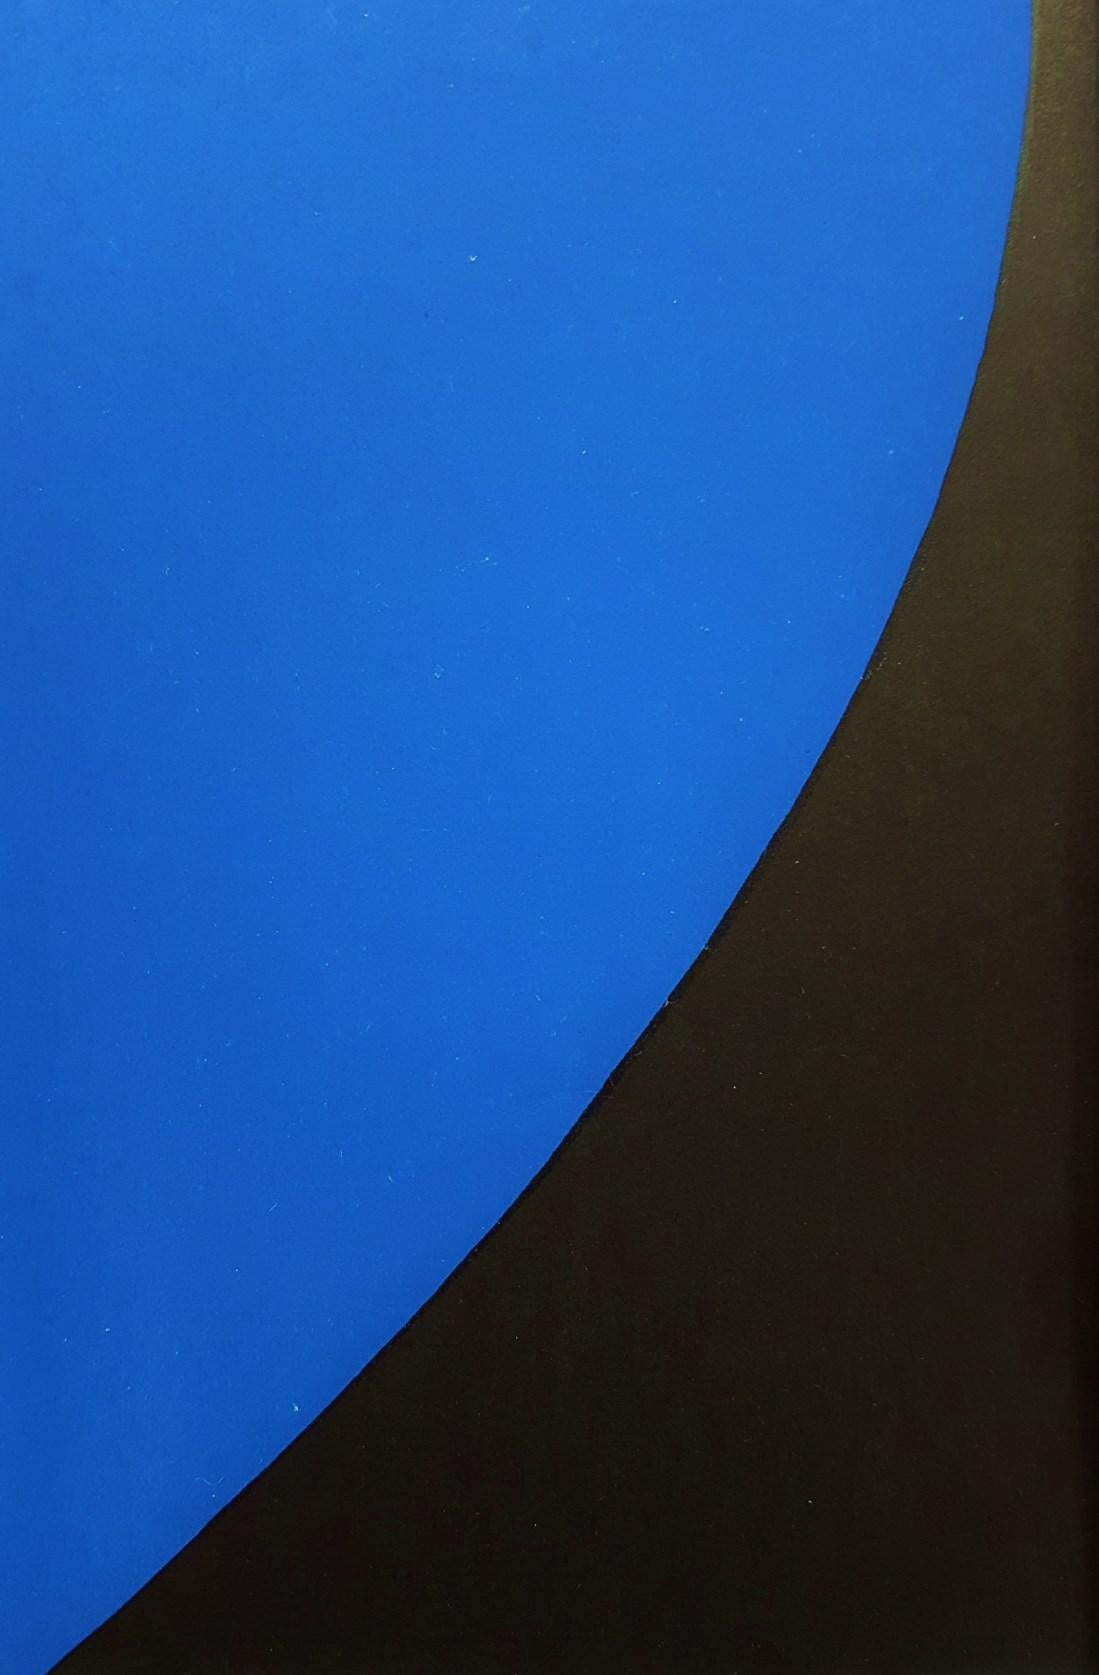 An original lithograph on smooth wove paper by American artist Ellsworth Kelly (1923-2015) 